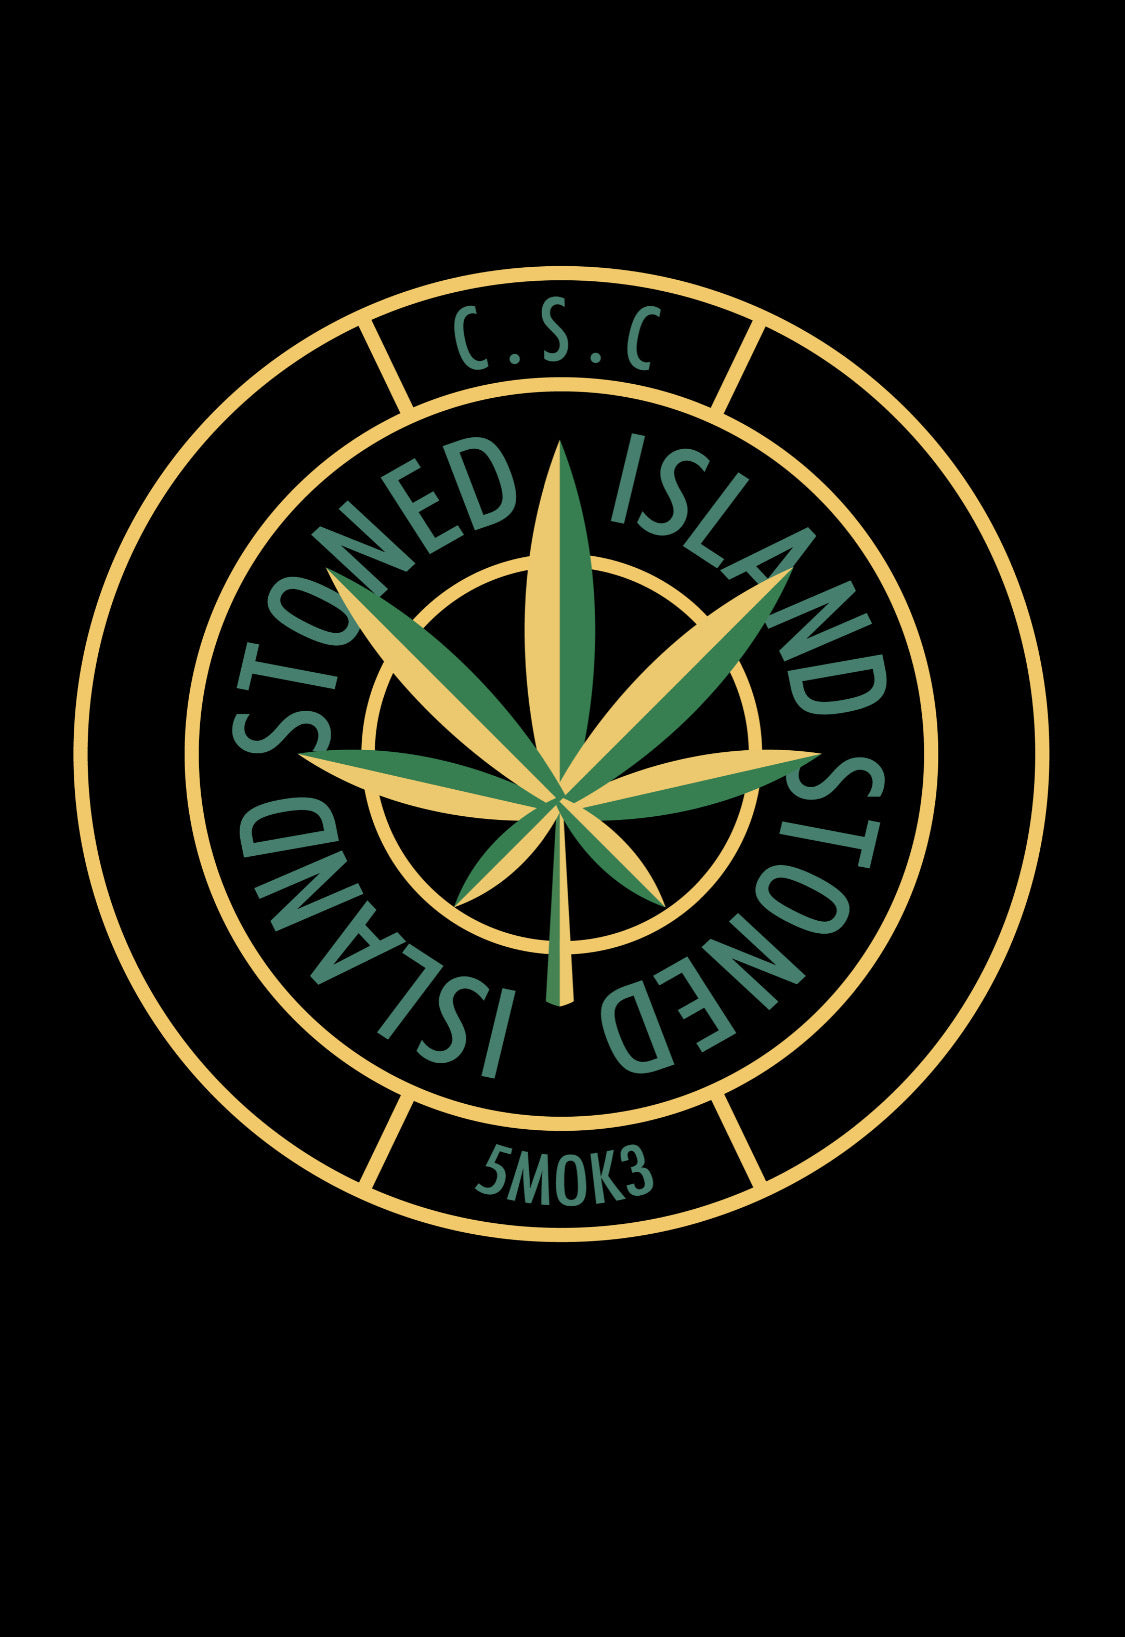 Stoned Island Privat Cigar and Cannabis club